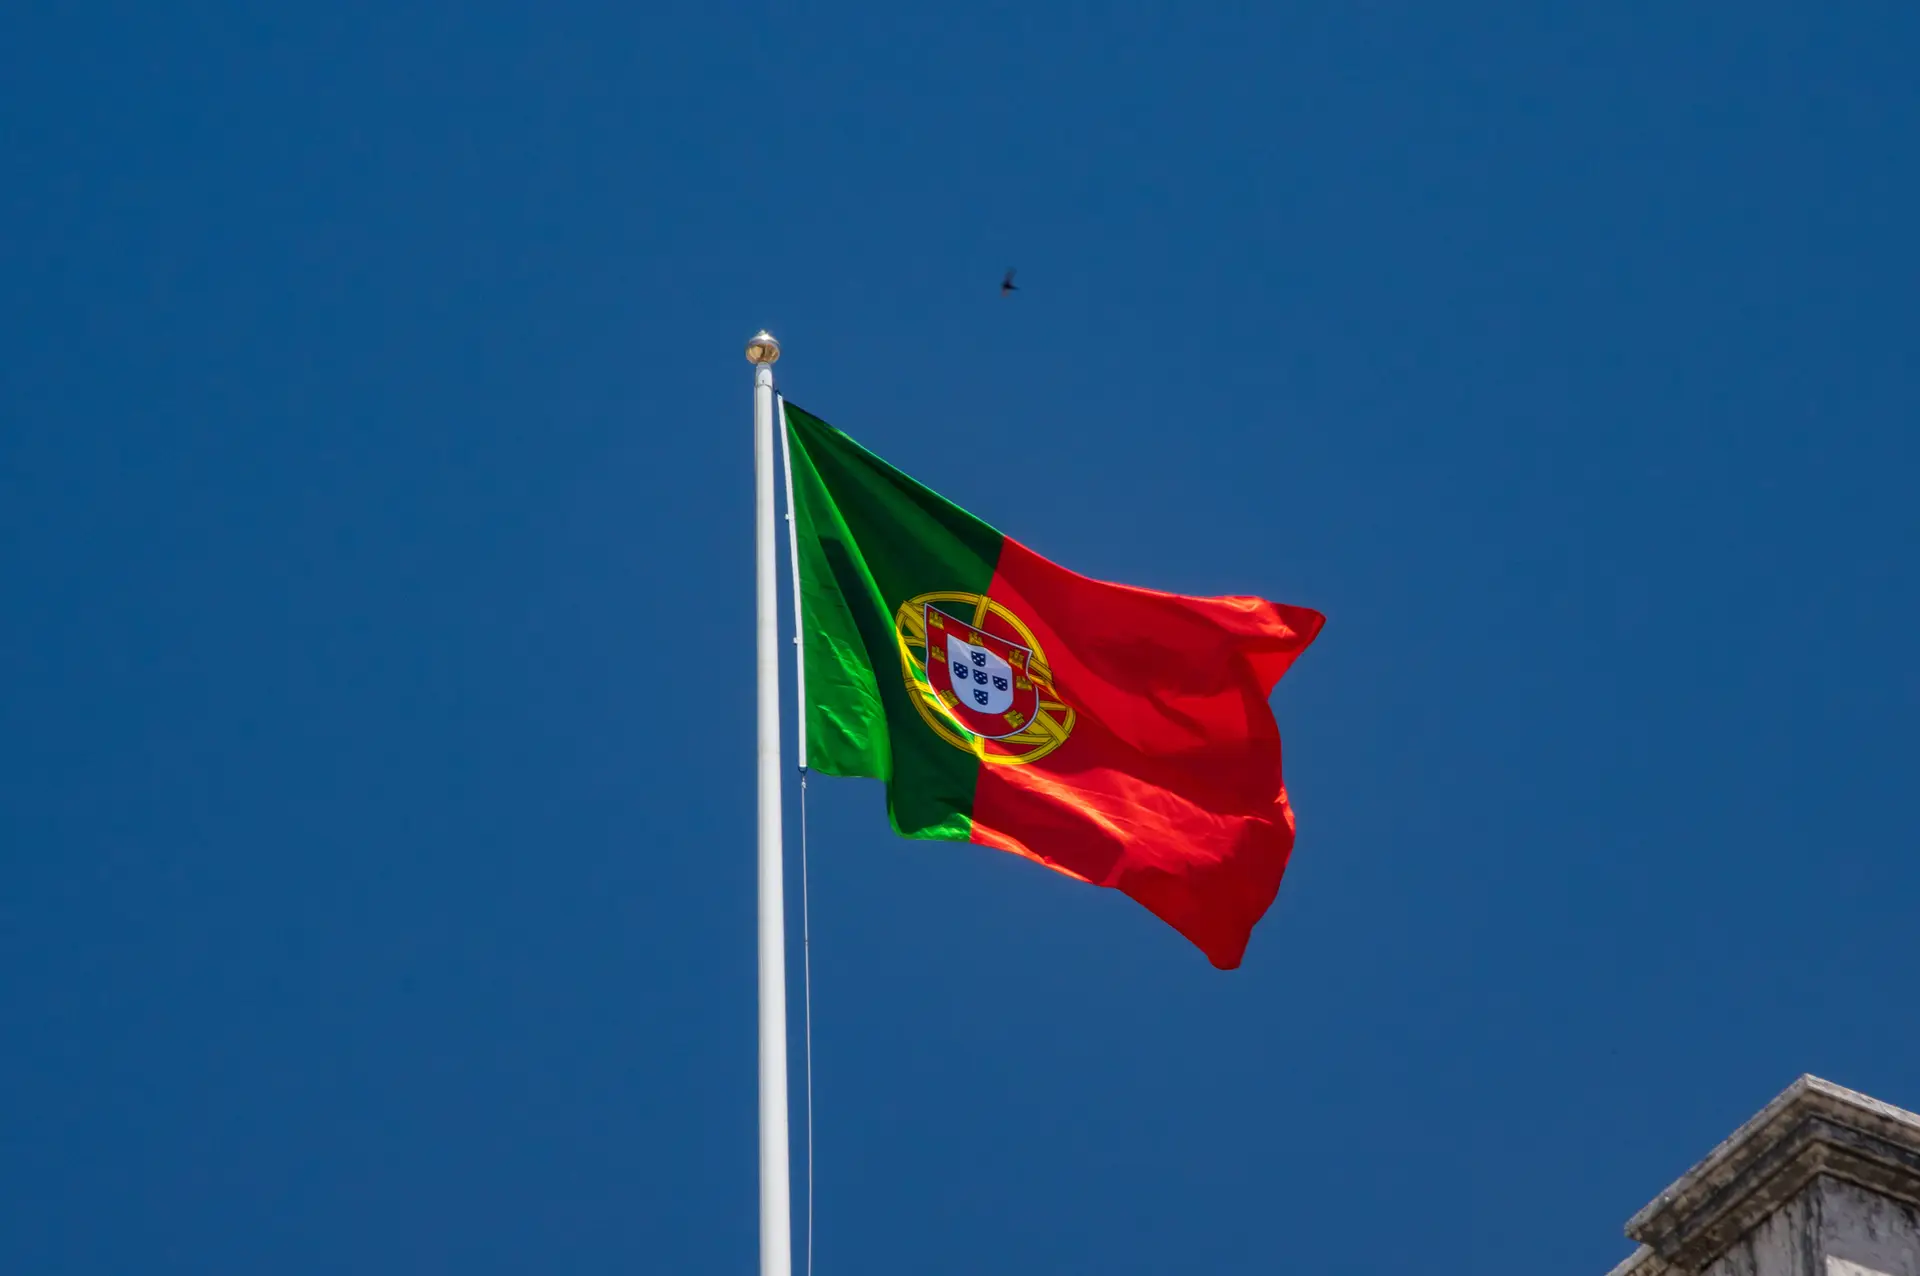 Fitch sobe rating de Portugal para "BBB+"